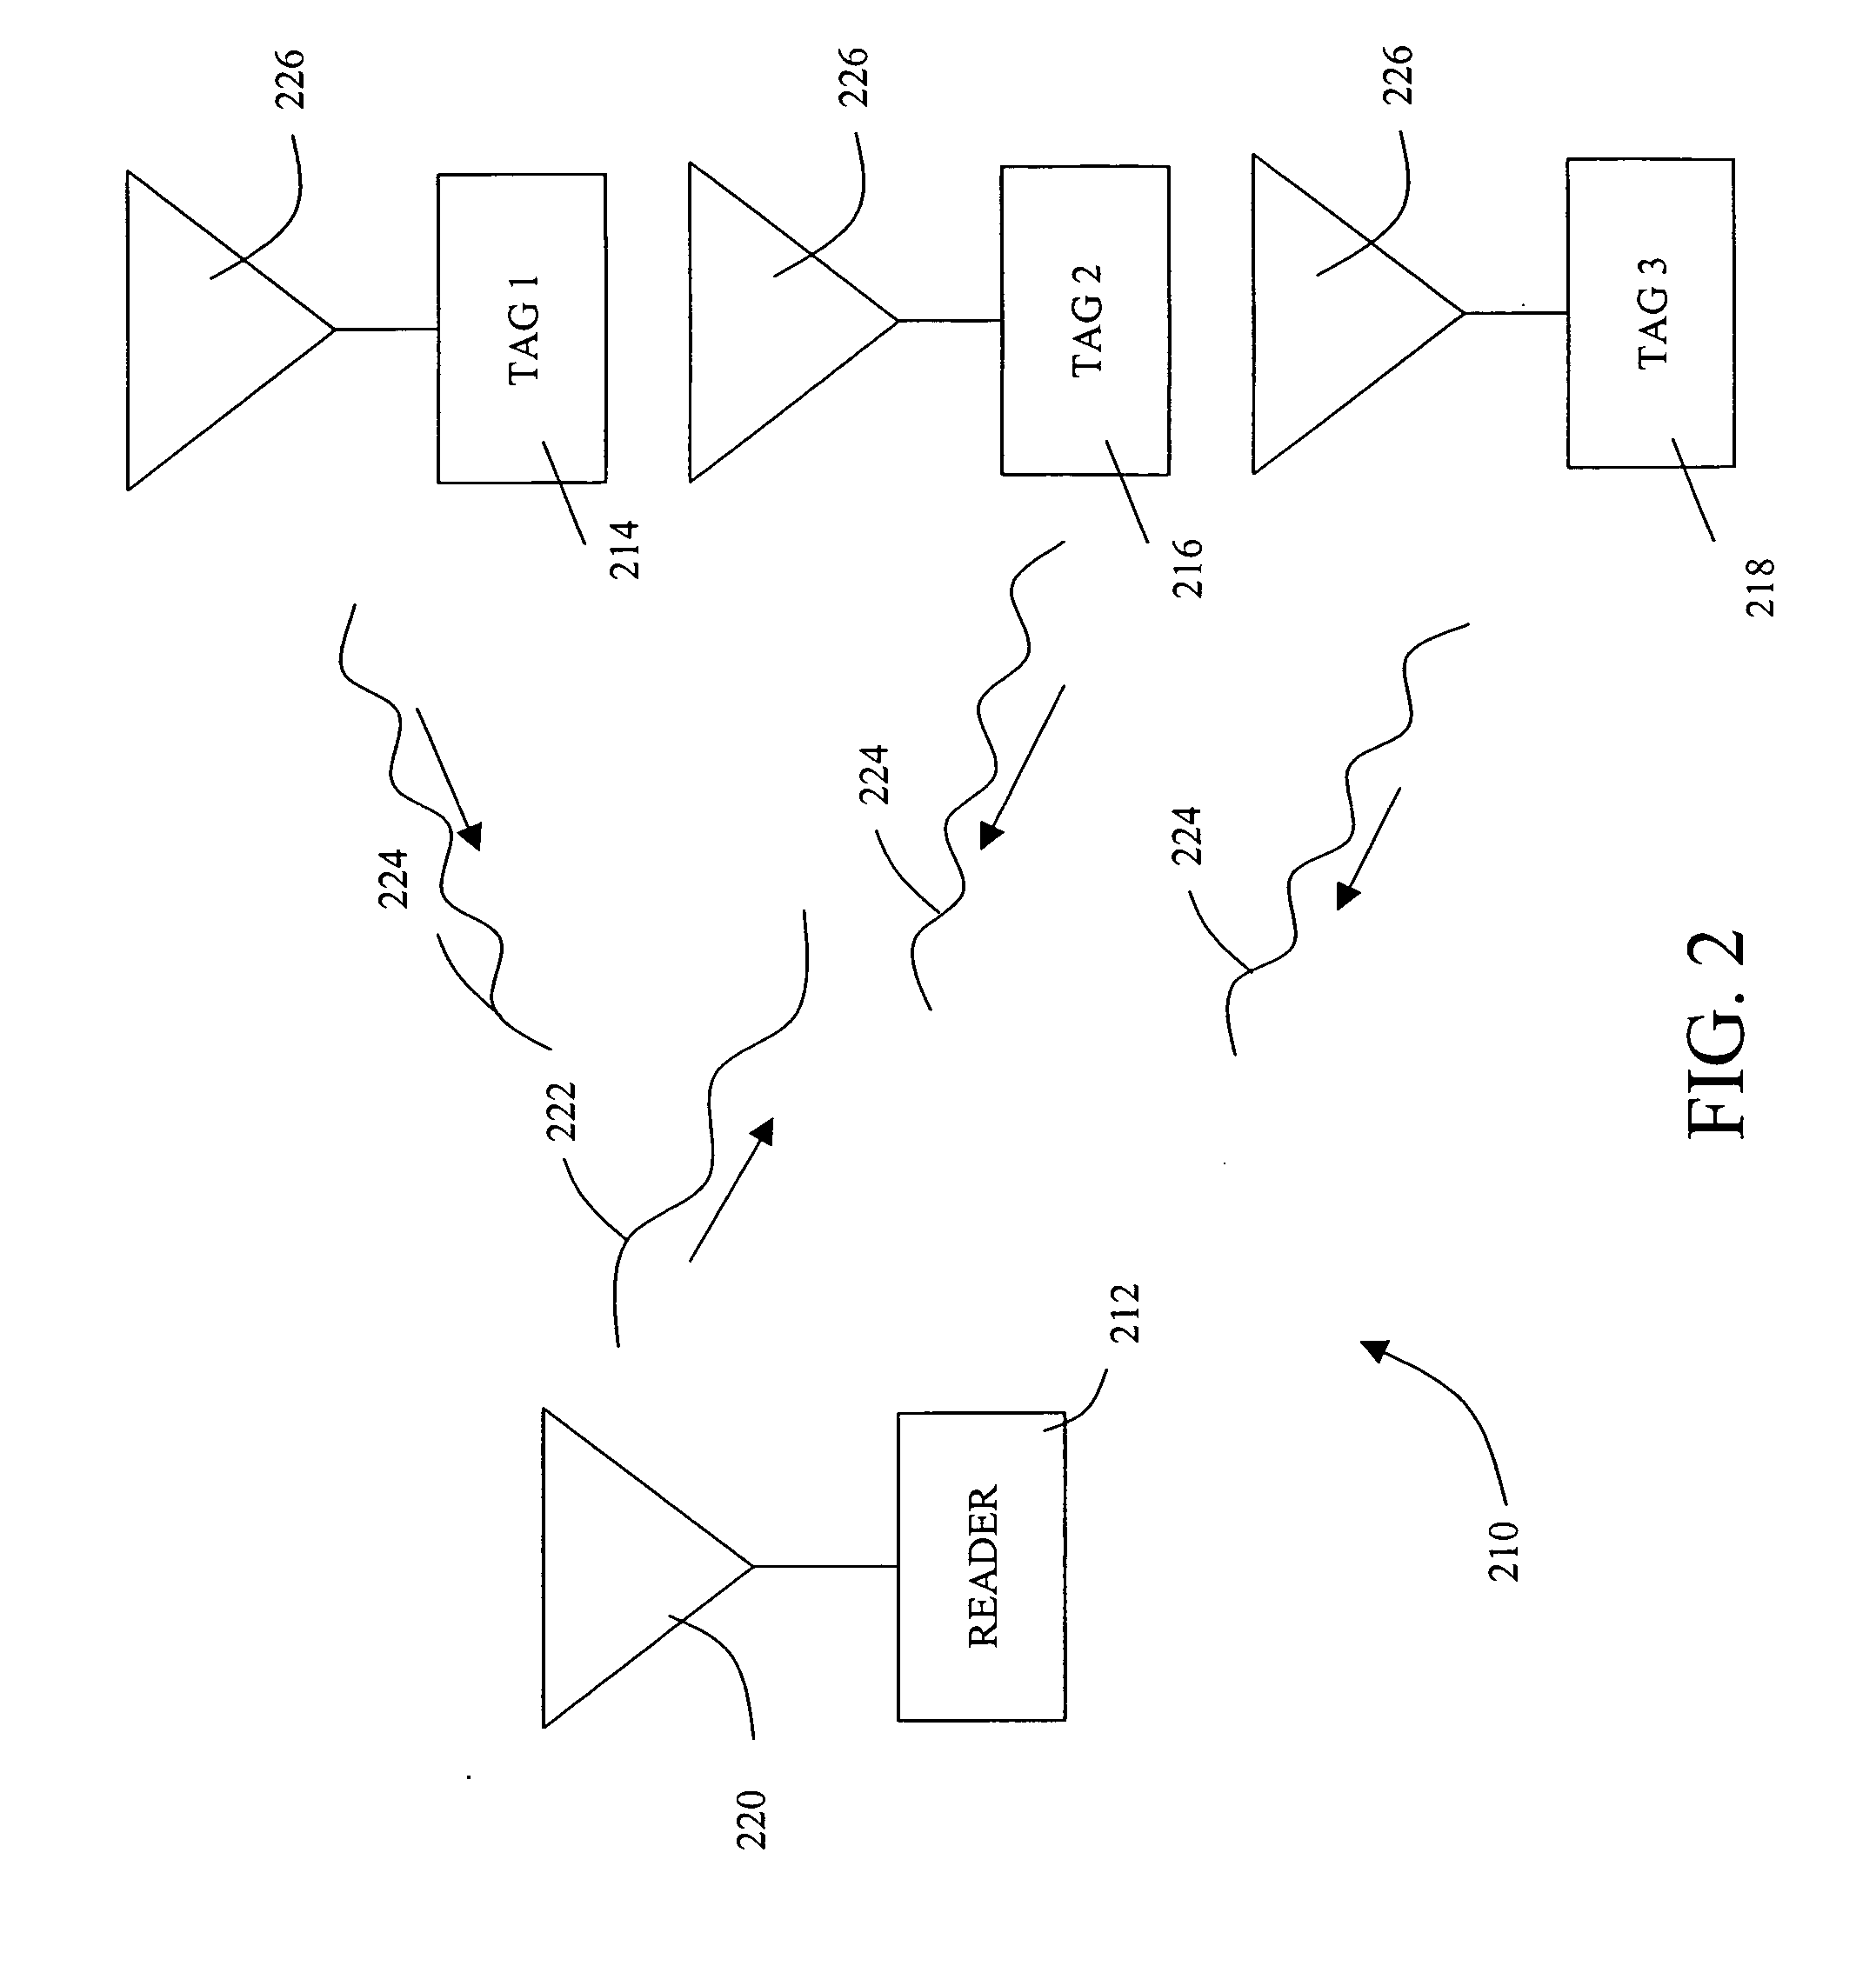 System and method for optimizing power usage in a radio frequency communication device